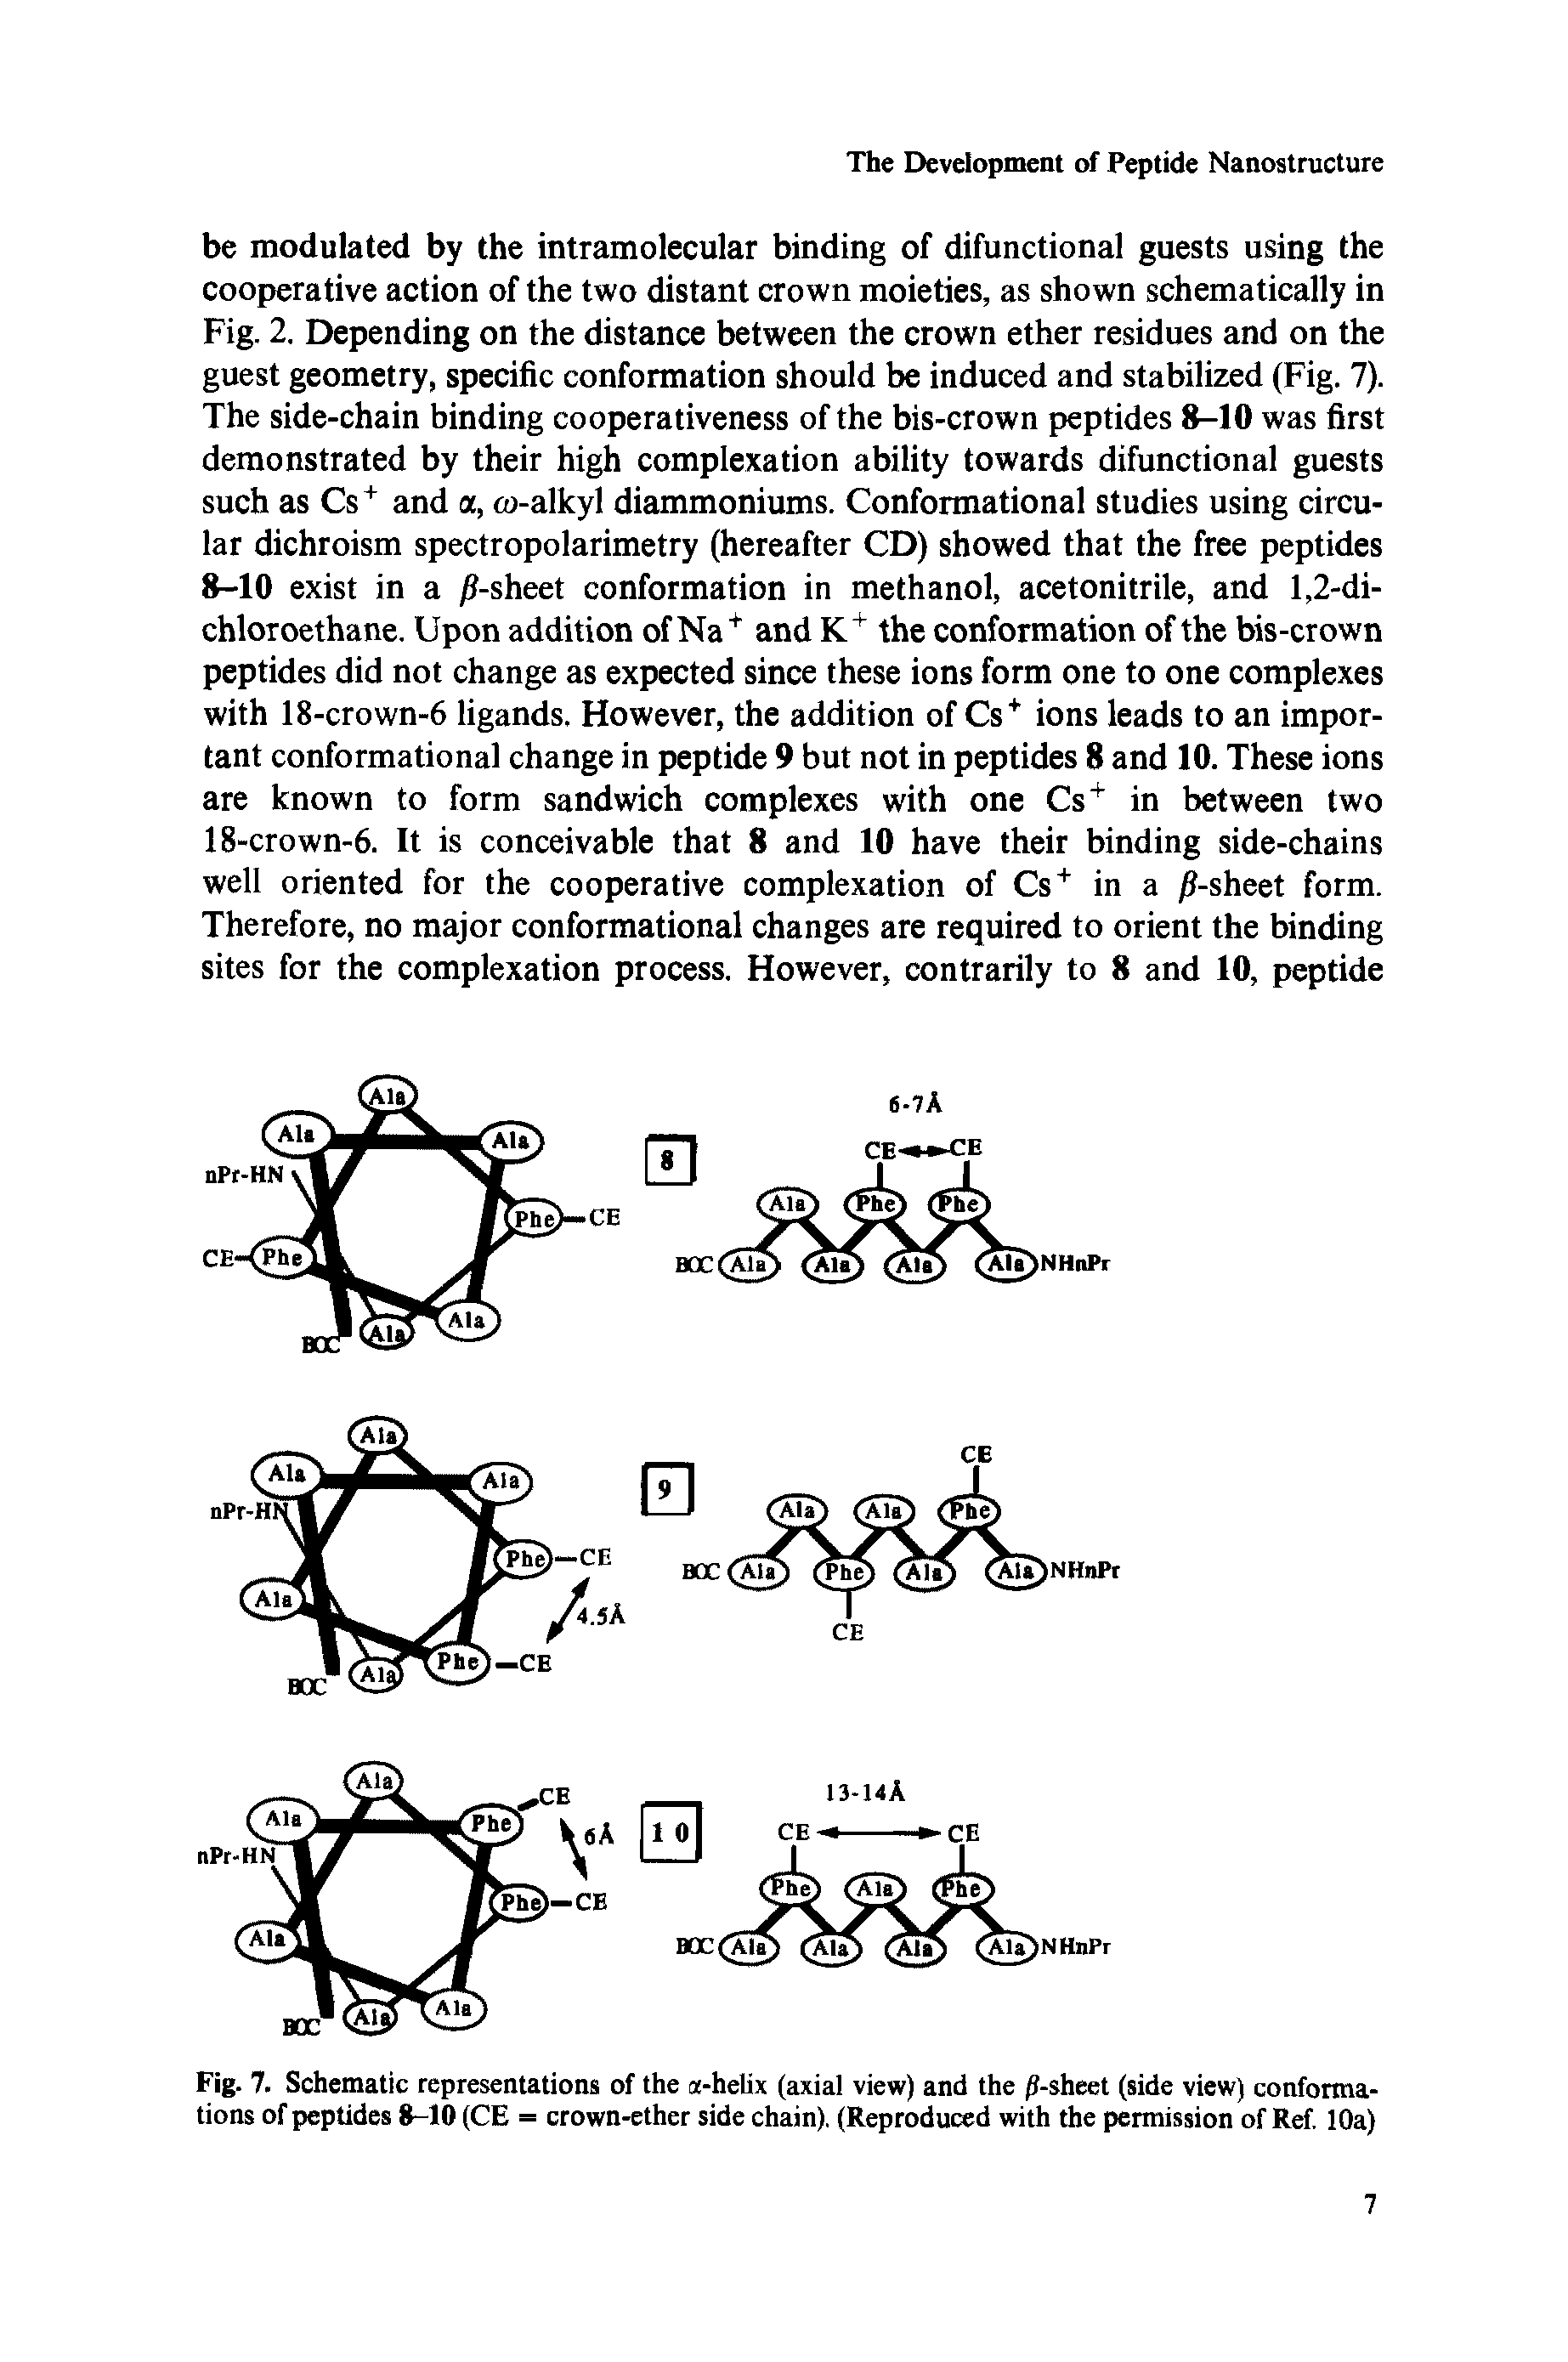 Fig. 7. Schematic representations of the a-helix (axial view) and the /J-sheet (side view) conformations of peptides 8-10 (CE = crown-ether side chain). (Reproduced with the permission of Ref, 10a)...